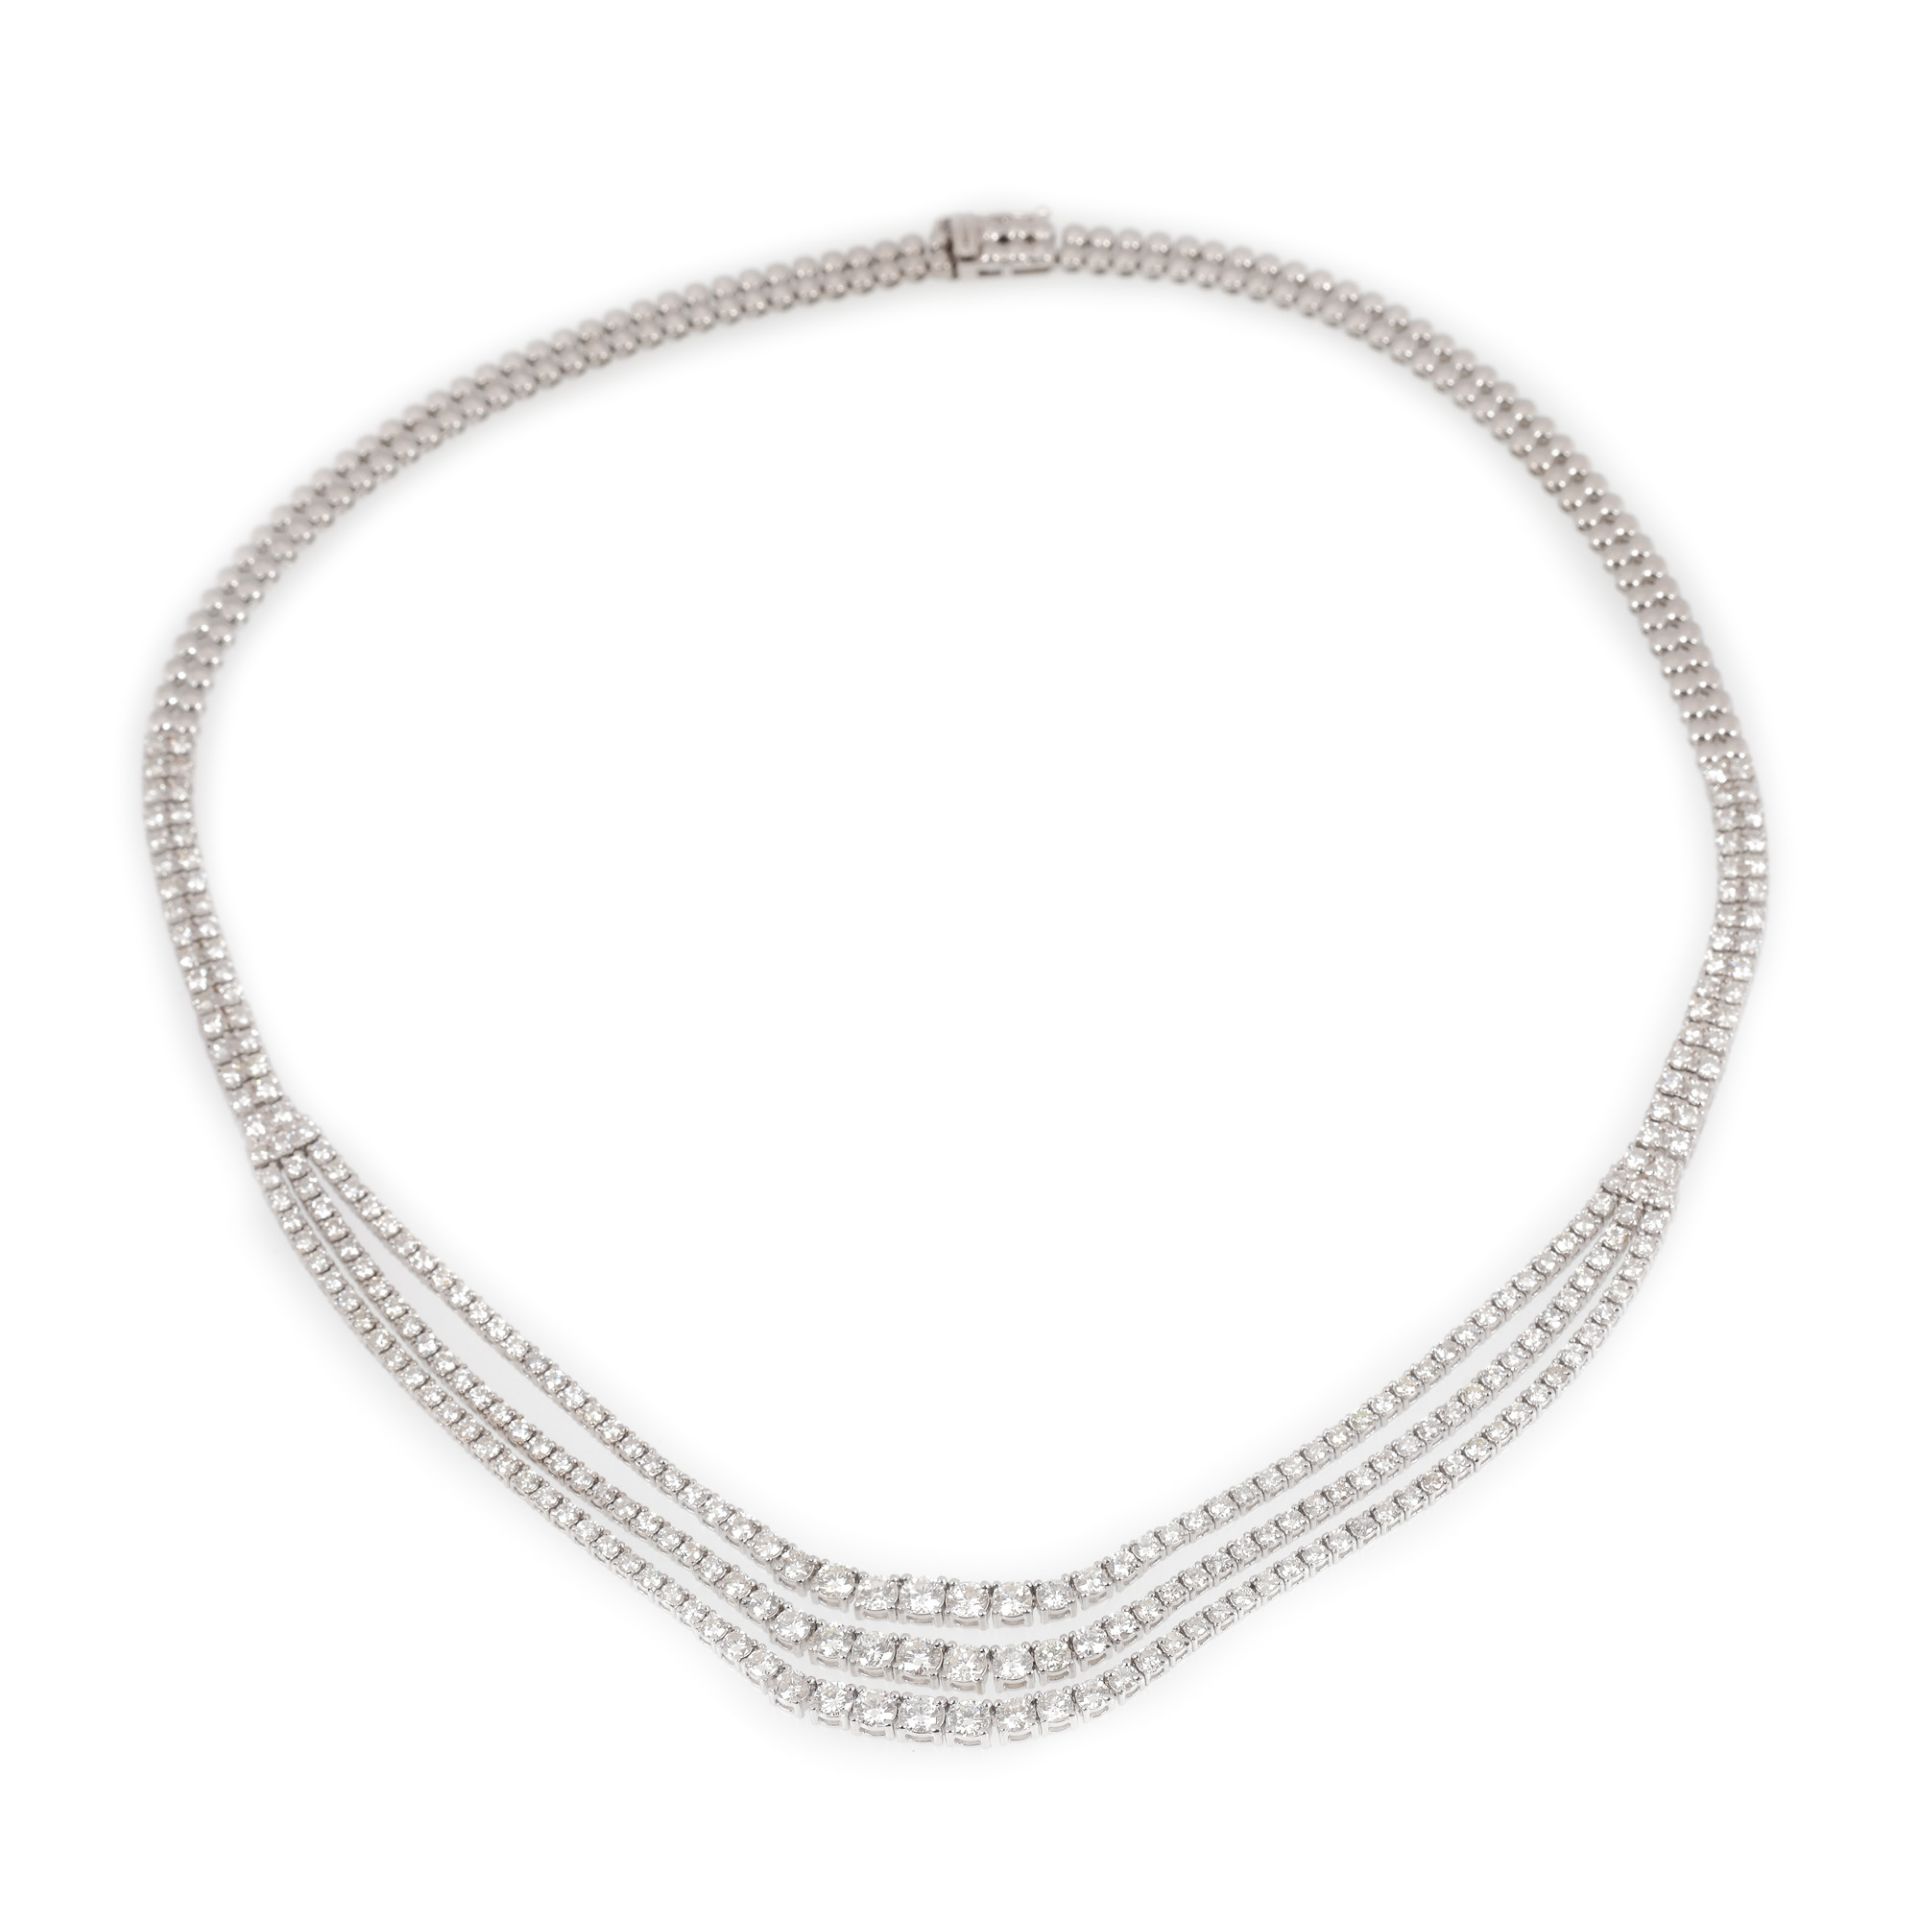 White gold necklace, decorated with three rows of diamonds